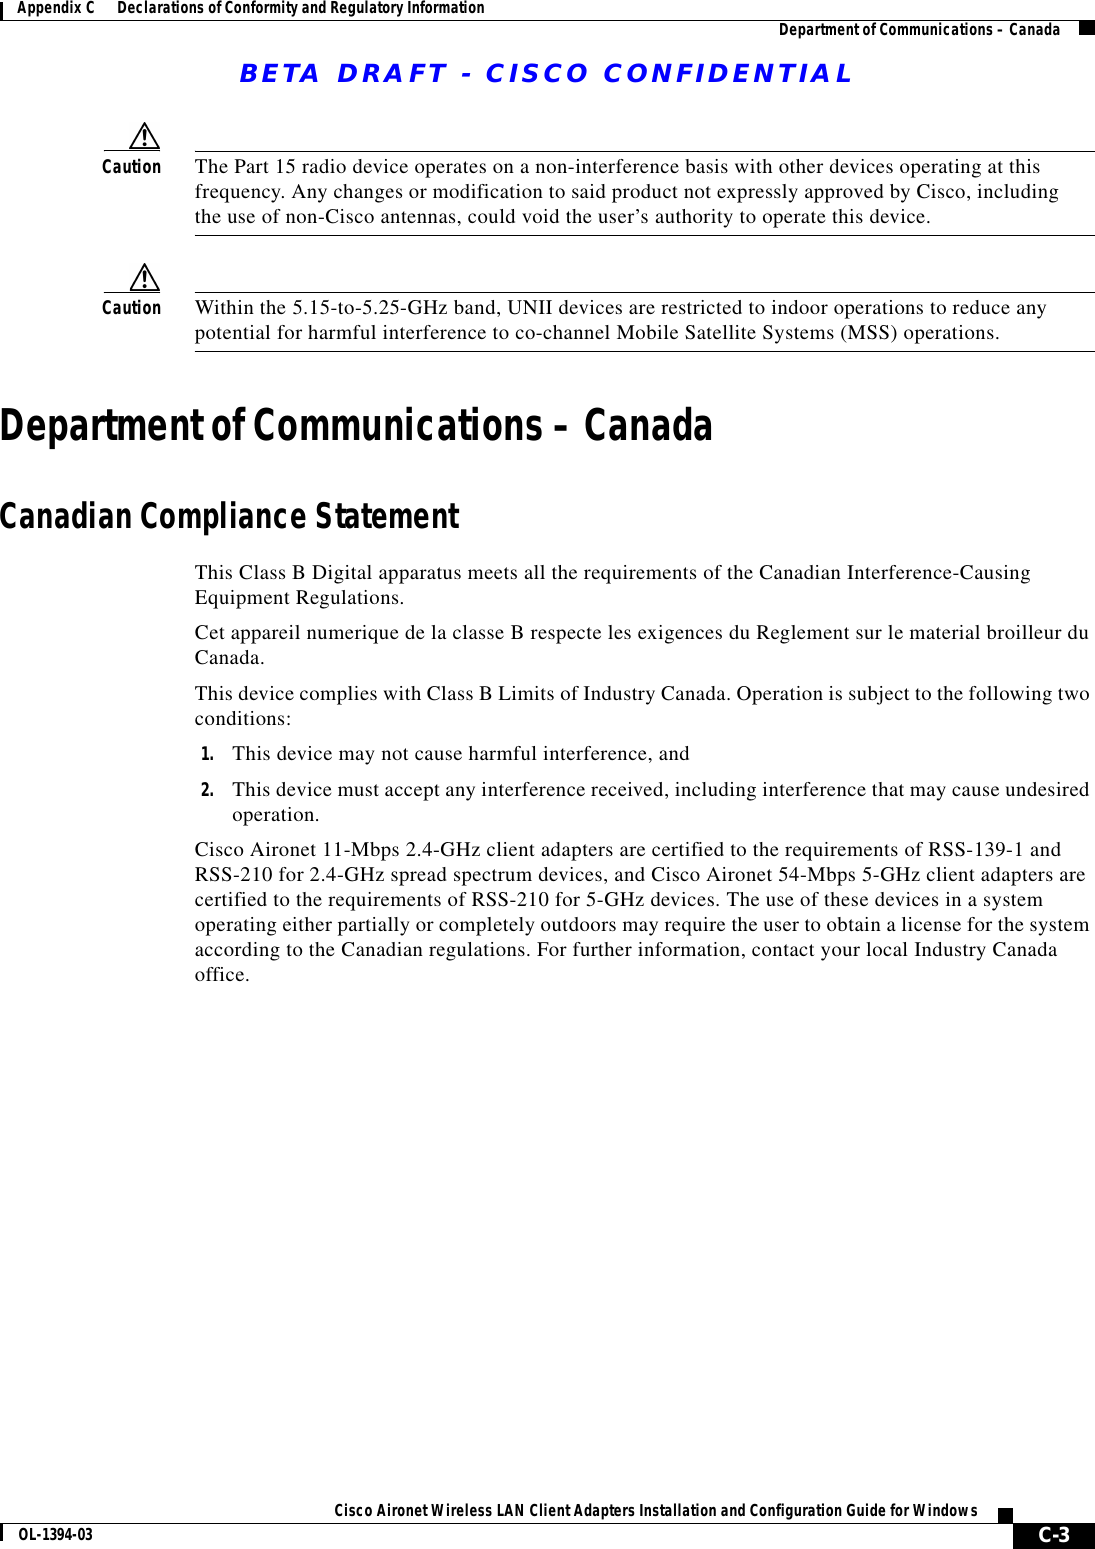 BETA DRAFT - CISCO CONFIDENTIALC-3Cisco Aironet Wireless LAN Client Adapters Installation and Configuration Guide for WindowsOL-1394-03Appendix C      Declarations of Conformity and Regulatory Information Department of Communications – CanadaCaution The Part 15 radio device operates on a non-interference basis with other devices operating at this frequency. Any changes or modification to said product not expressly approved by Cisco, including the use of non-Cisco antennas, could void the user’s authority to operate this device.Caution Within the 5.15-to-5.25-GHz band, UNII devices are restricted to indoor operations to reduce any potential for harmful interference to co-channel Mobile Satellite Systems (MSS) operations.Department of Communications – CanadaCanadian Compliance StatementThis Class B Digital apparatus meets all the requirements of the Canadian Interference-Causing Equipment Regulations.Cet appareil numerique de la classe B respecte les exigences du Reglement sur le material broilleur du Canada.This device complies with Class B Limits of Industry Canada. Operation is subject to the following two conditions:1. This device may not cause harmful interference, and2. This device must accept any interference received, including interference that may cause undesired operation.Cisco Aironet 11-Mbps 2.4-GHz client adapters are certified to the requirements of RSS-139-1 and RSS-210 for 2.4-GHz spread spectrum devices, and Cisco Aironet 54-Mbps 5-GHz client adapters are certified to the requirements of RSS-210 for 5-GHz devices. The use of these devices in a system operating either partially or completely outdoors may require the user to obtain a license for the system according to the Canadian regulations. For further information, contact your local Industry Canada office.